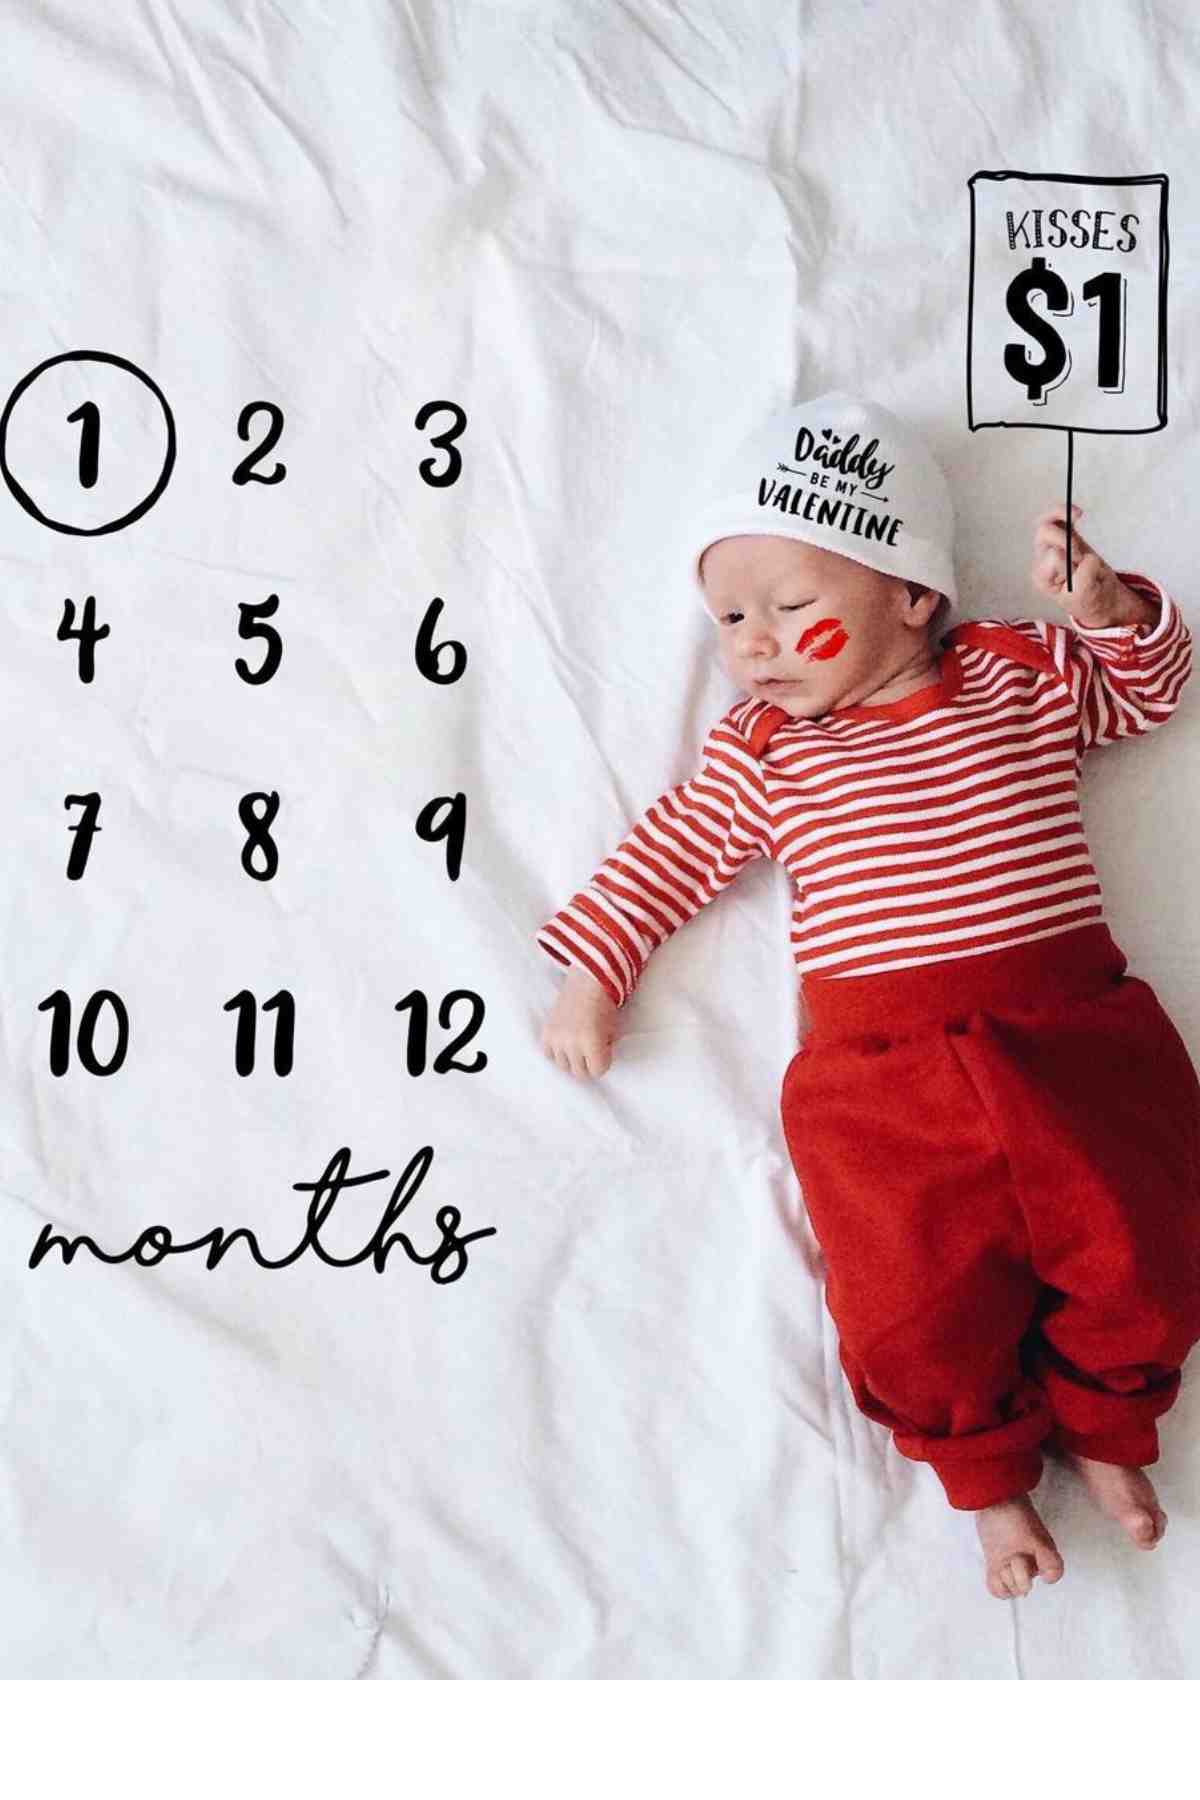 A baby is laying on a bed with a number sign.